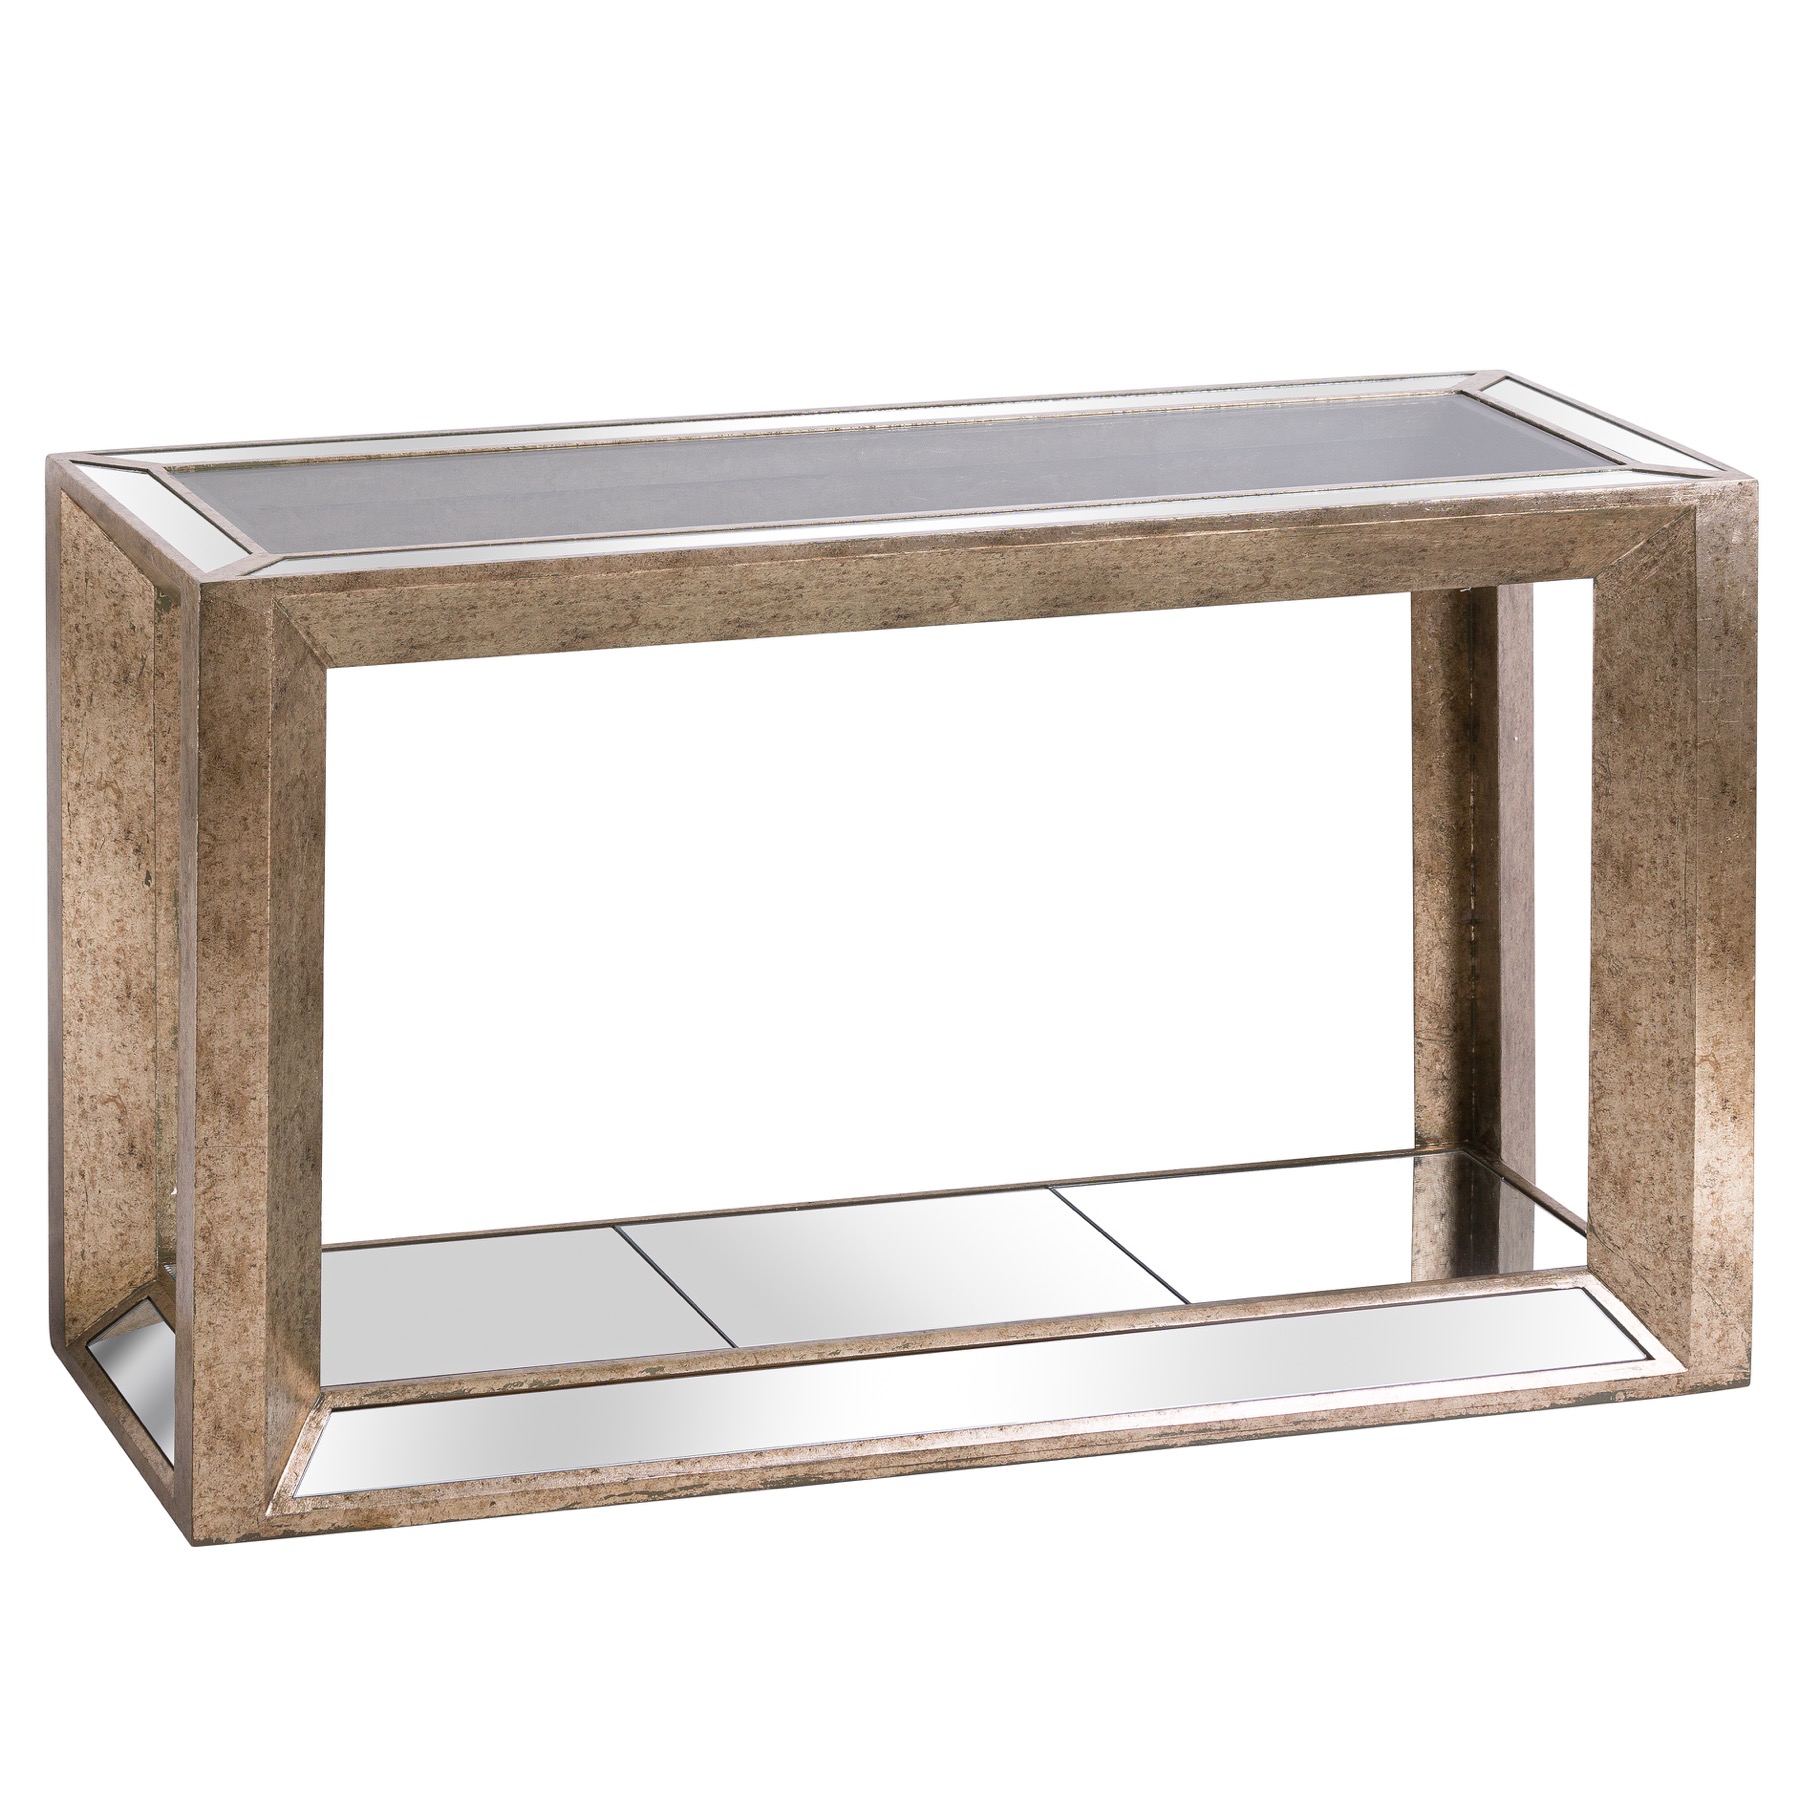 Augustus Mirrored Console Table with Shelf - Image 1